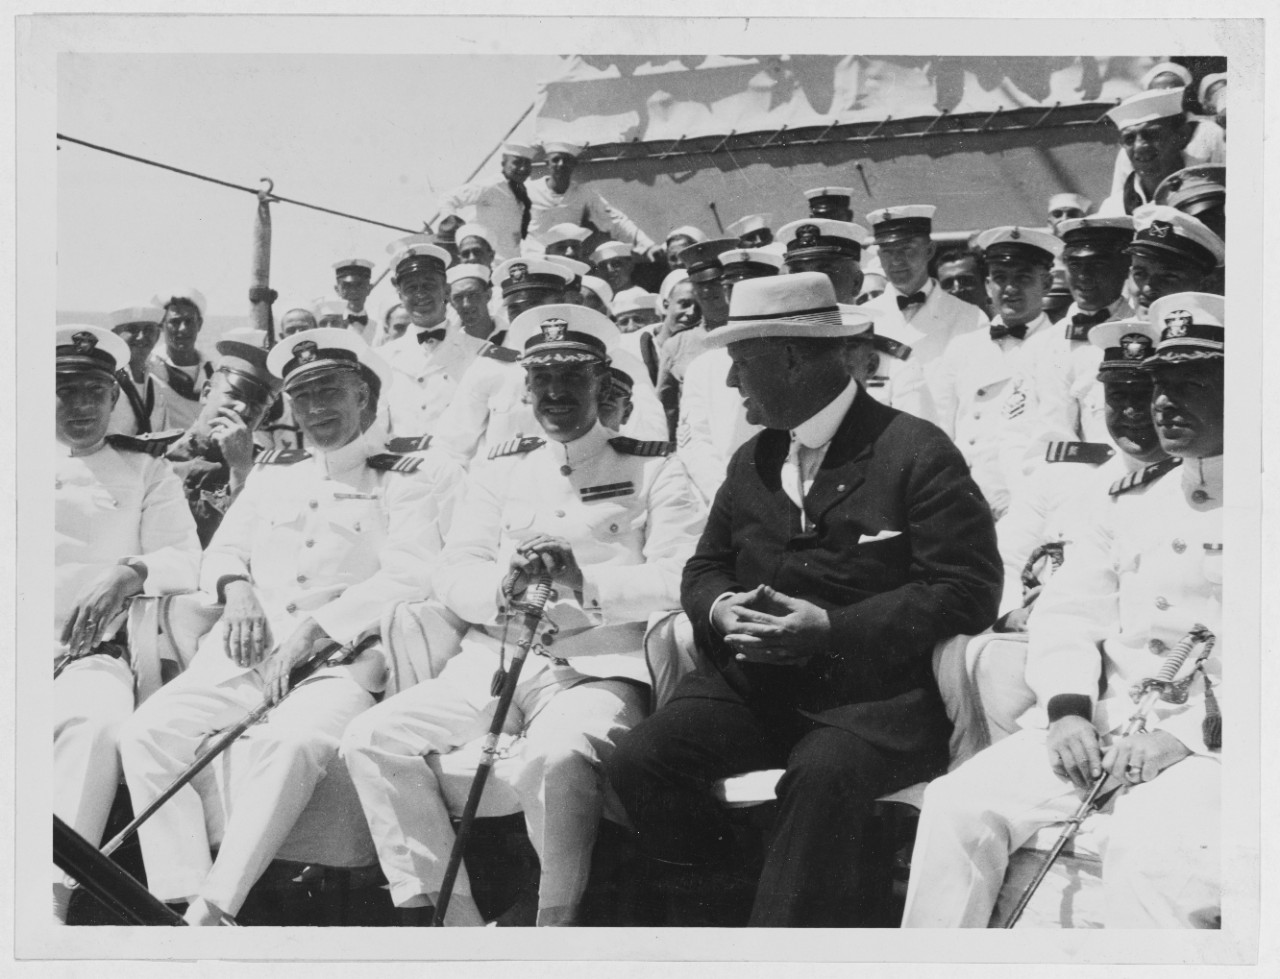 Secretary of the Navy E. Denby and officers on board U.S.S. HENDERSON (AP-1)